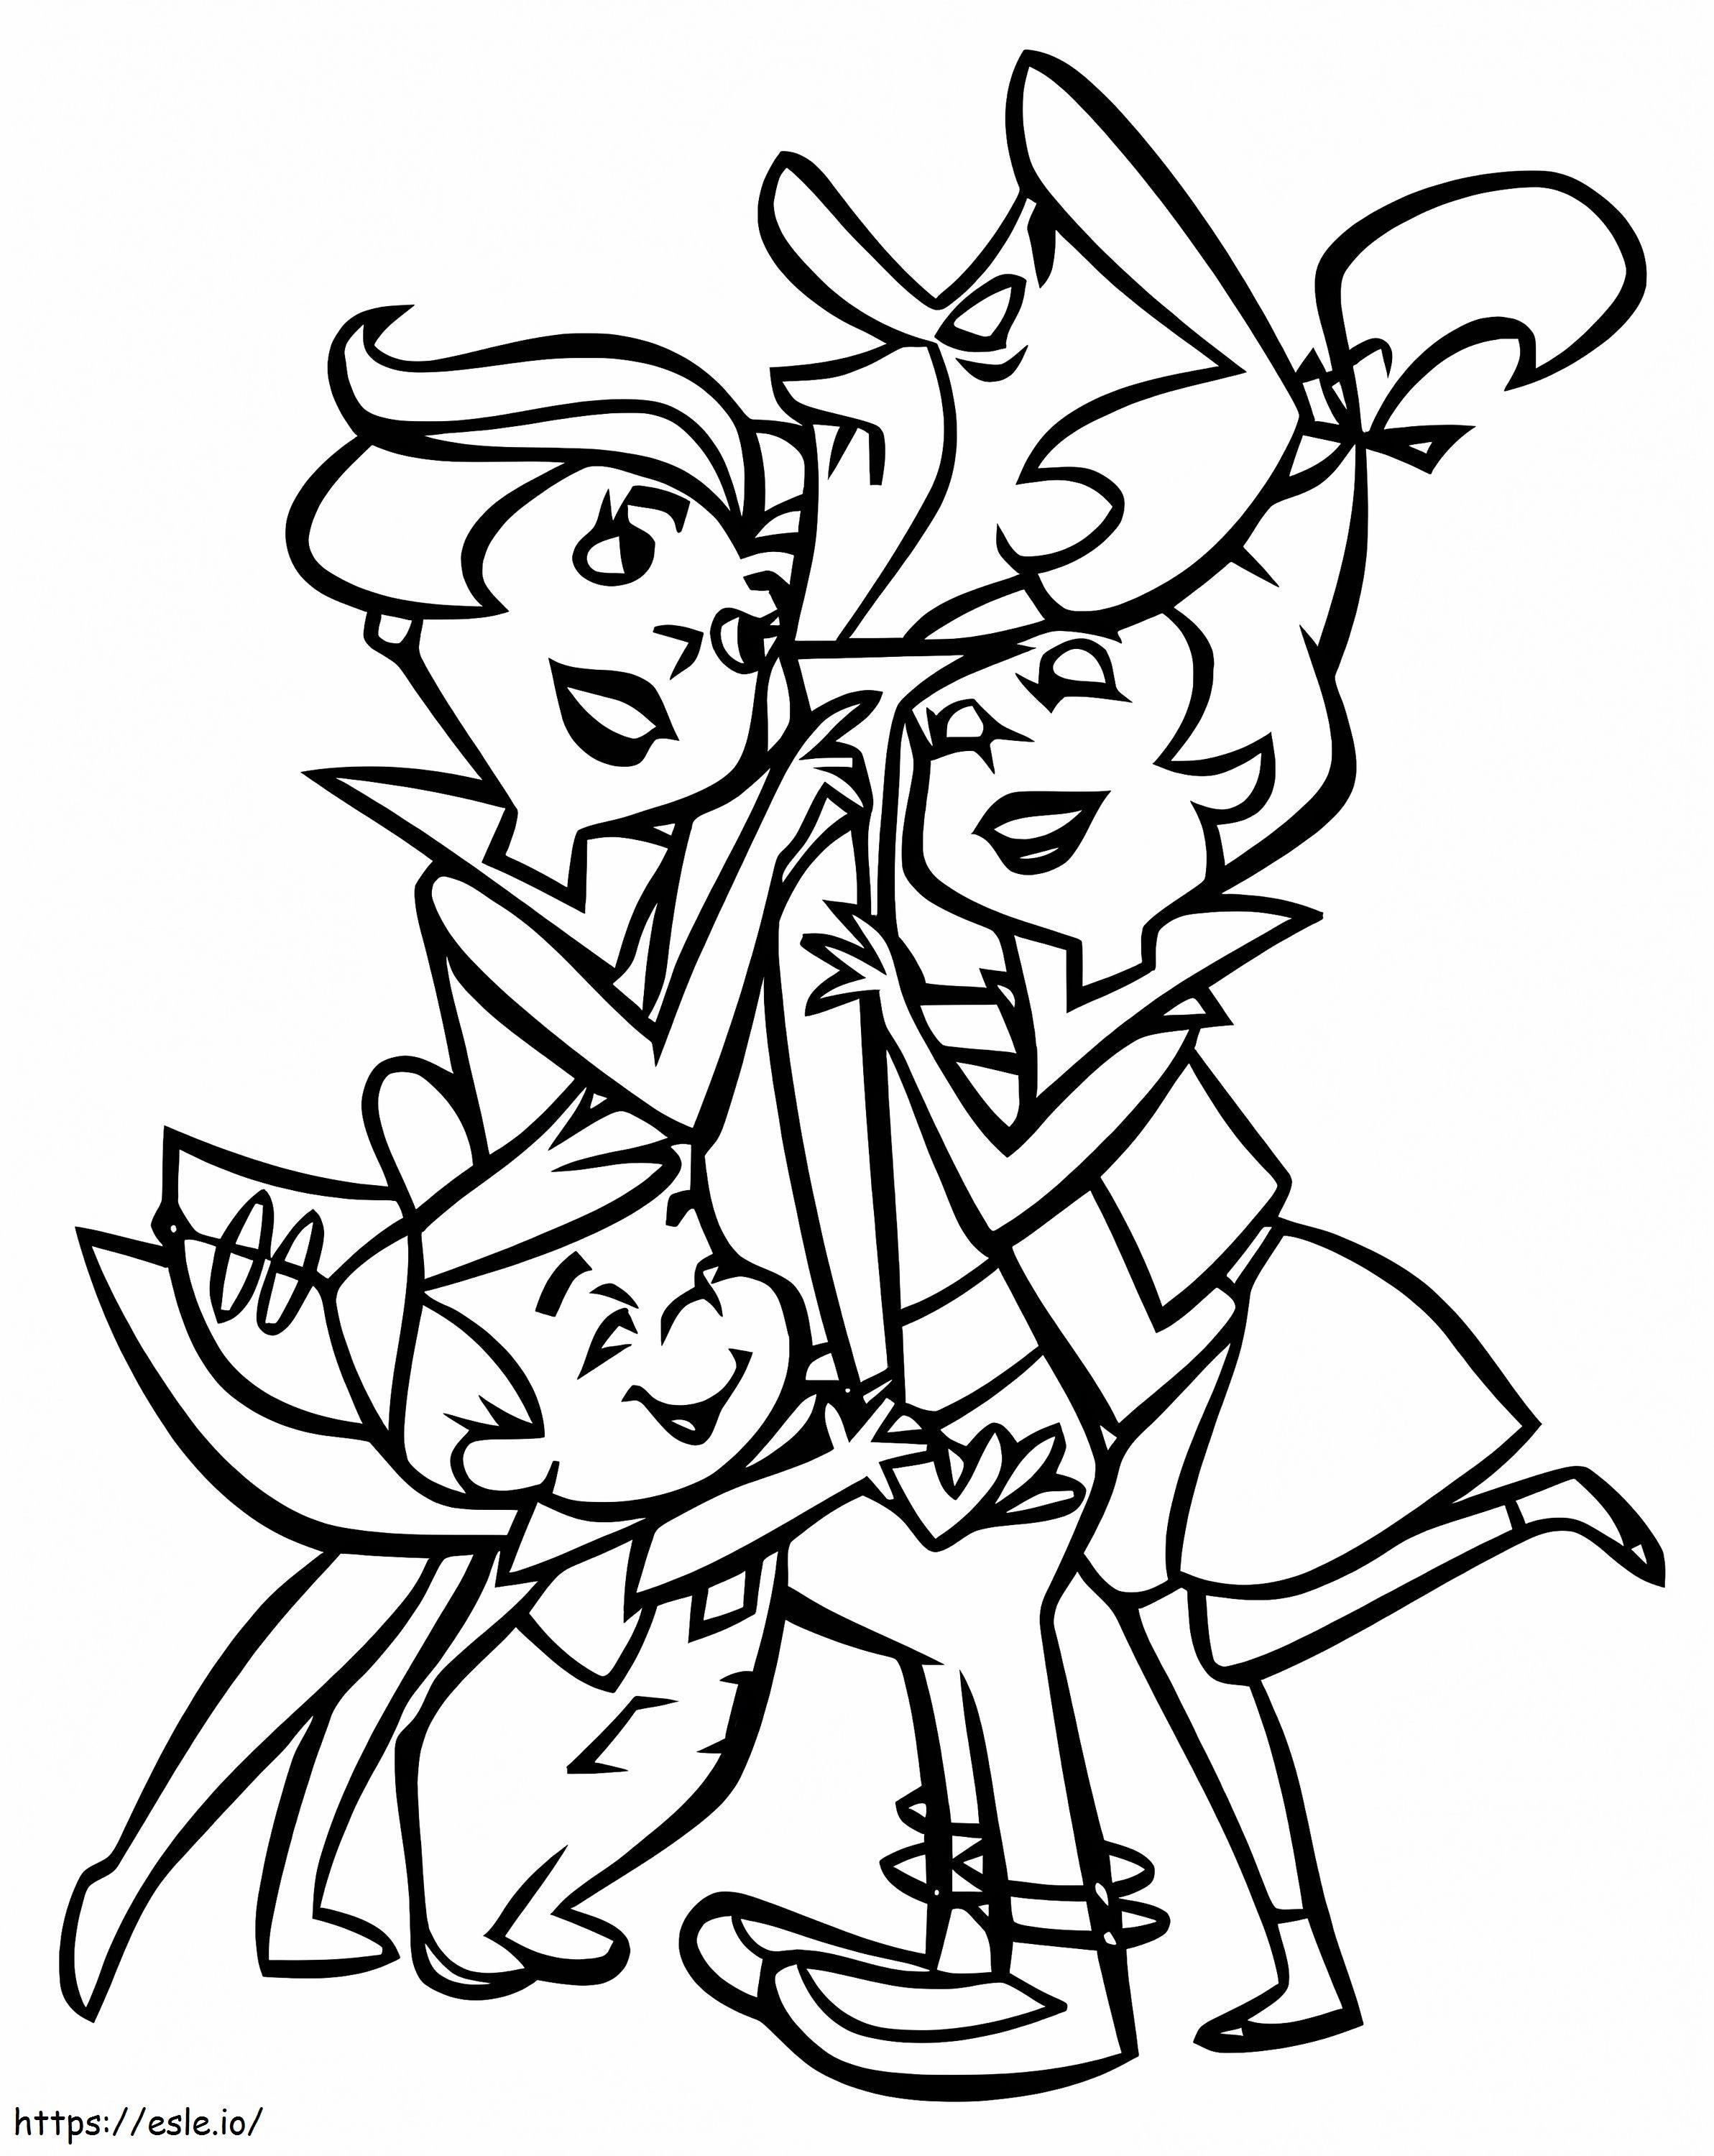 The Jetsons coloring page